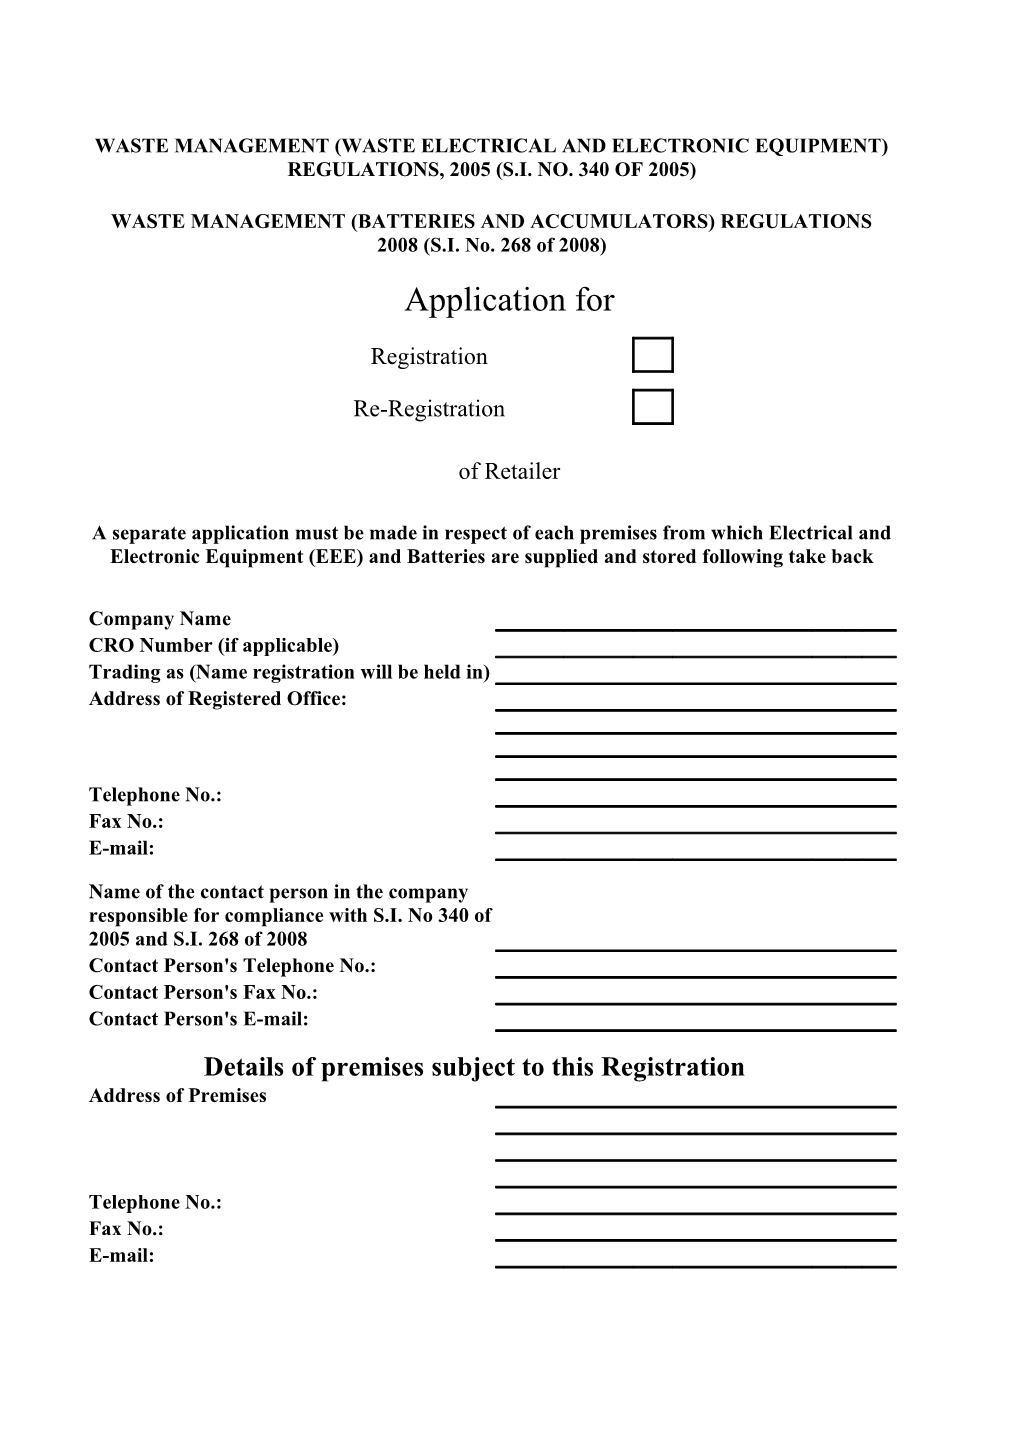 Waste Management (Waste Electrical and Electronic Equipment) Regulations, 2005 (S